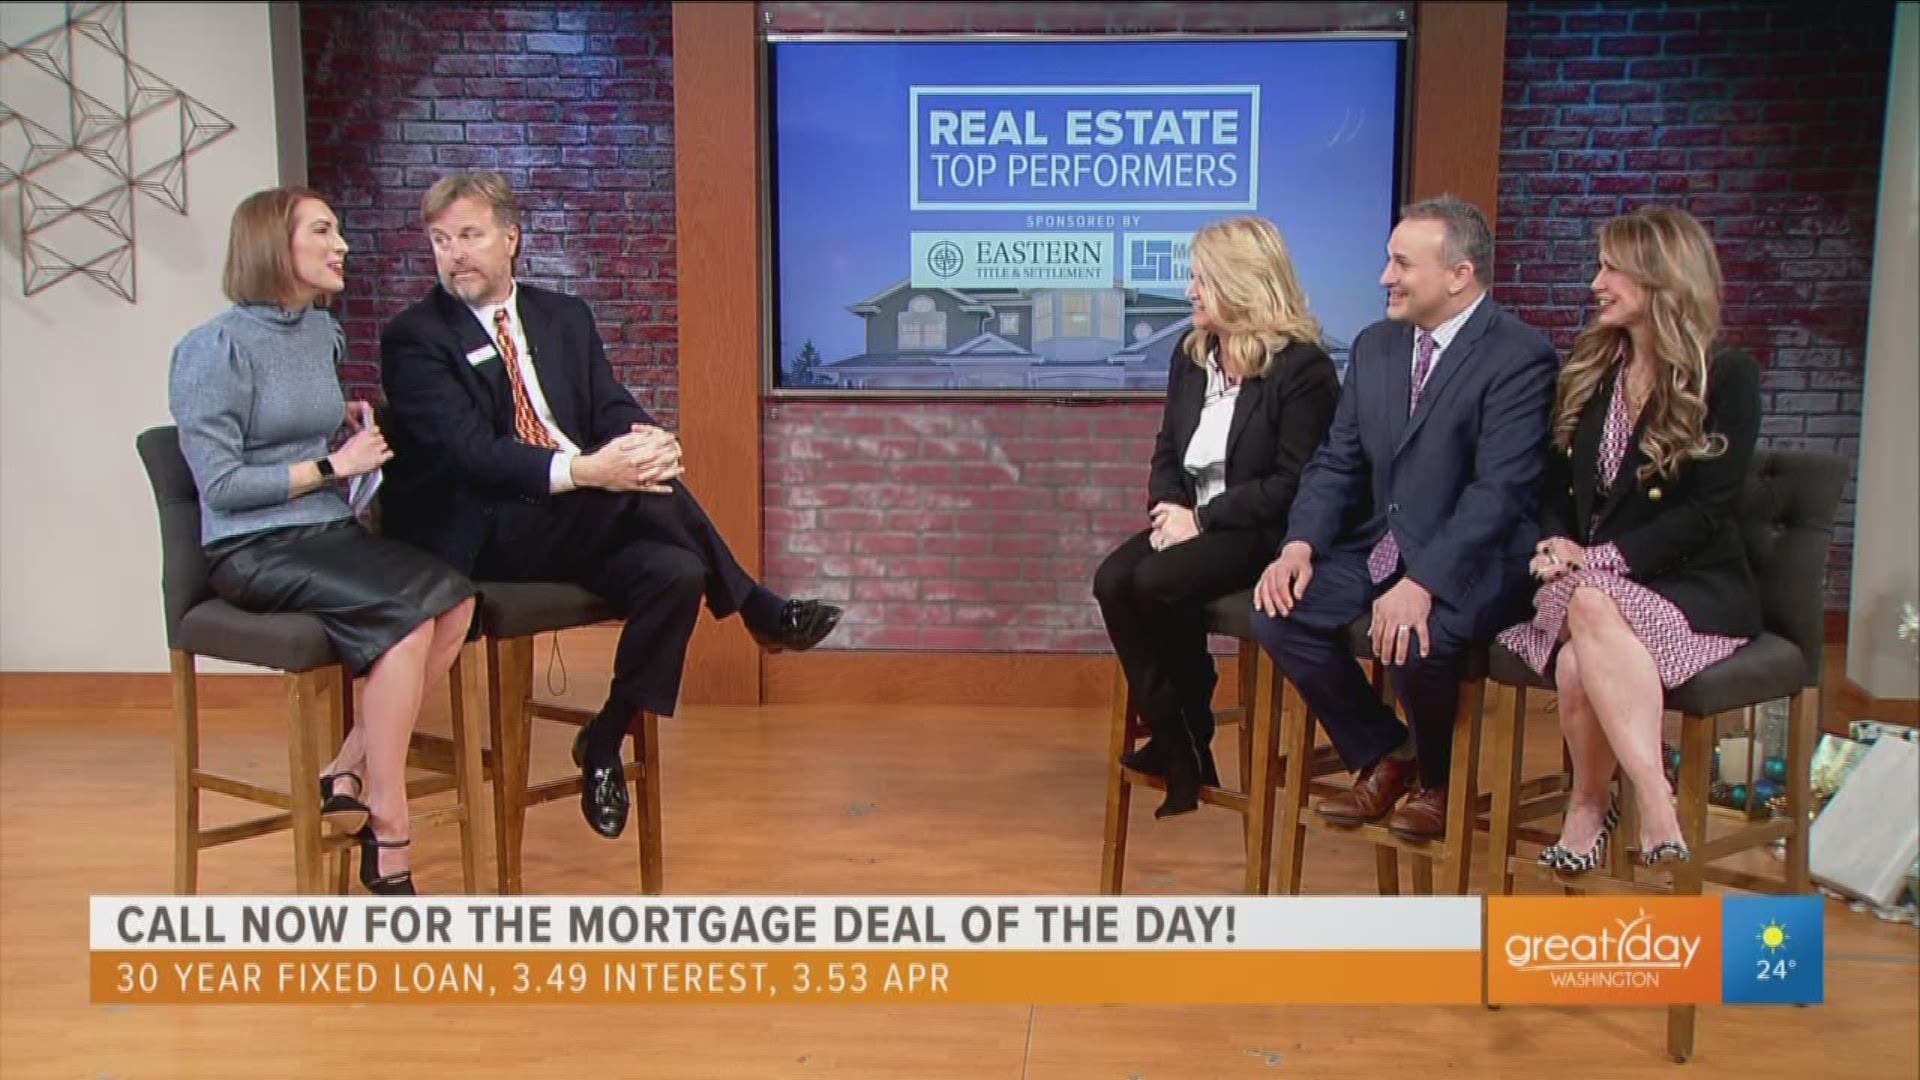 Top real estate experts break down the art of winning a real estate deal. This segment was sponsored by The Mortgage Link, Inc.